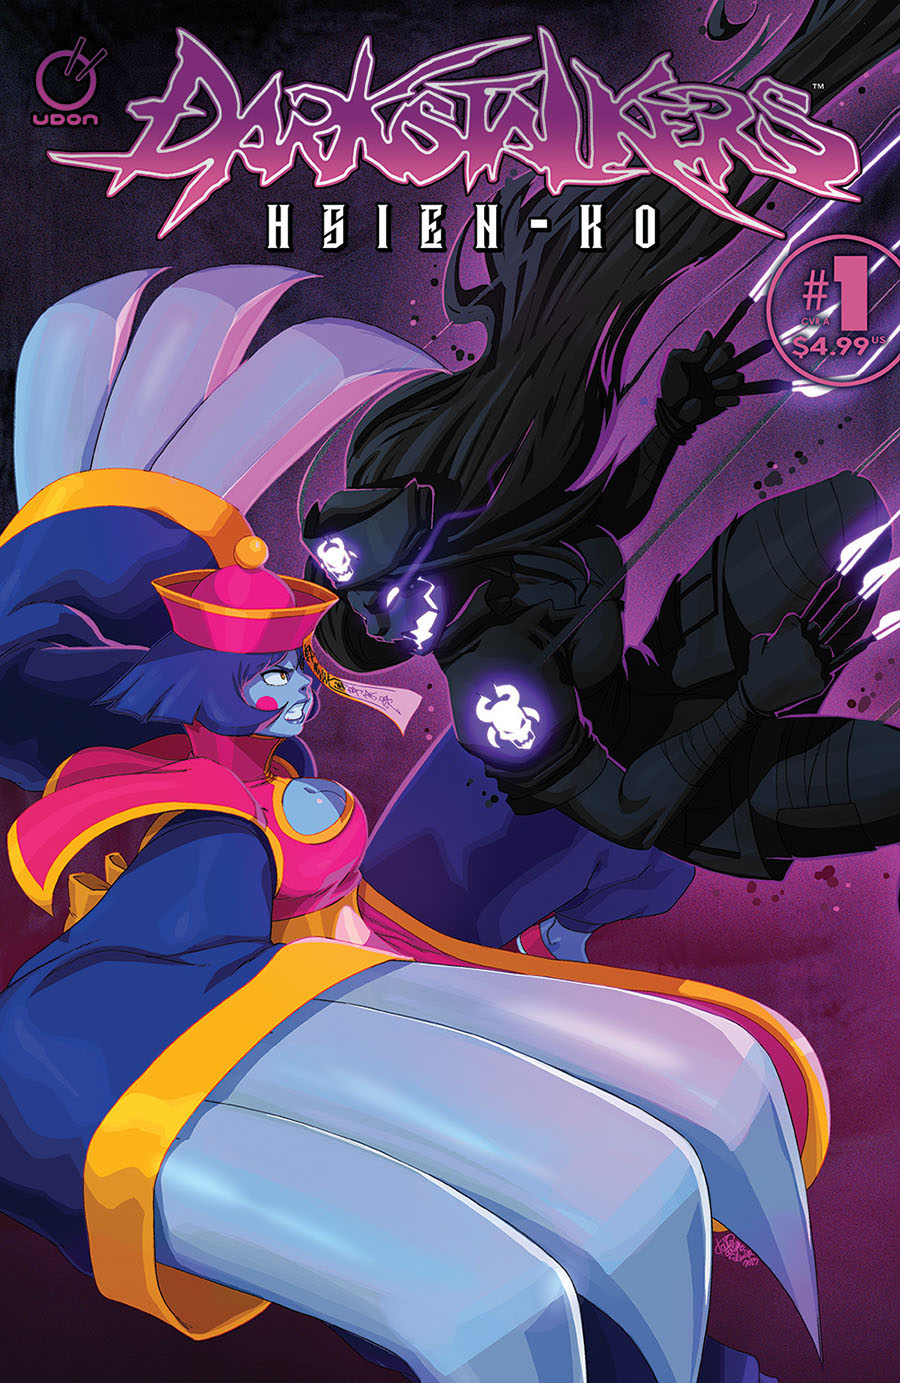 Darkstalkers Hsien-Ko #1 (One Shot) Cover B Variant Tovio Rogers Cover